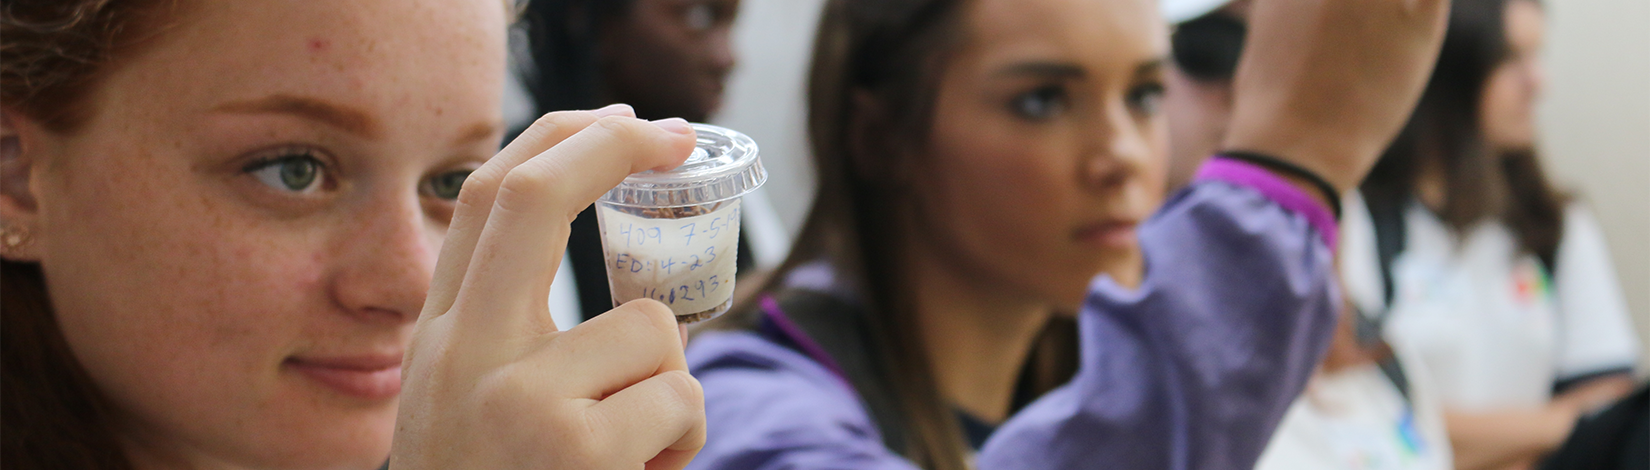 Student closely examines a plastic container with label. Students in the background are also examining containers.